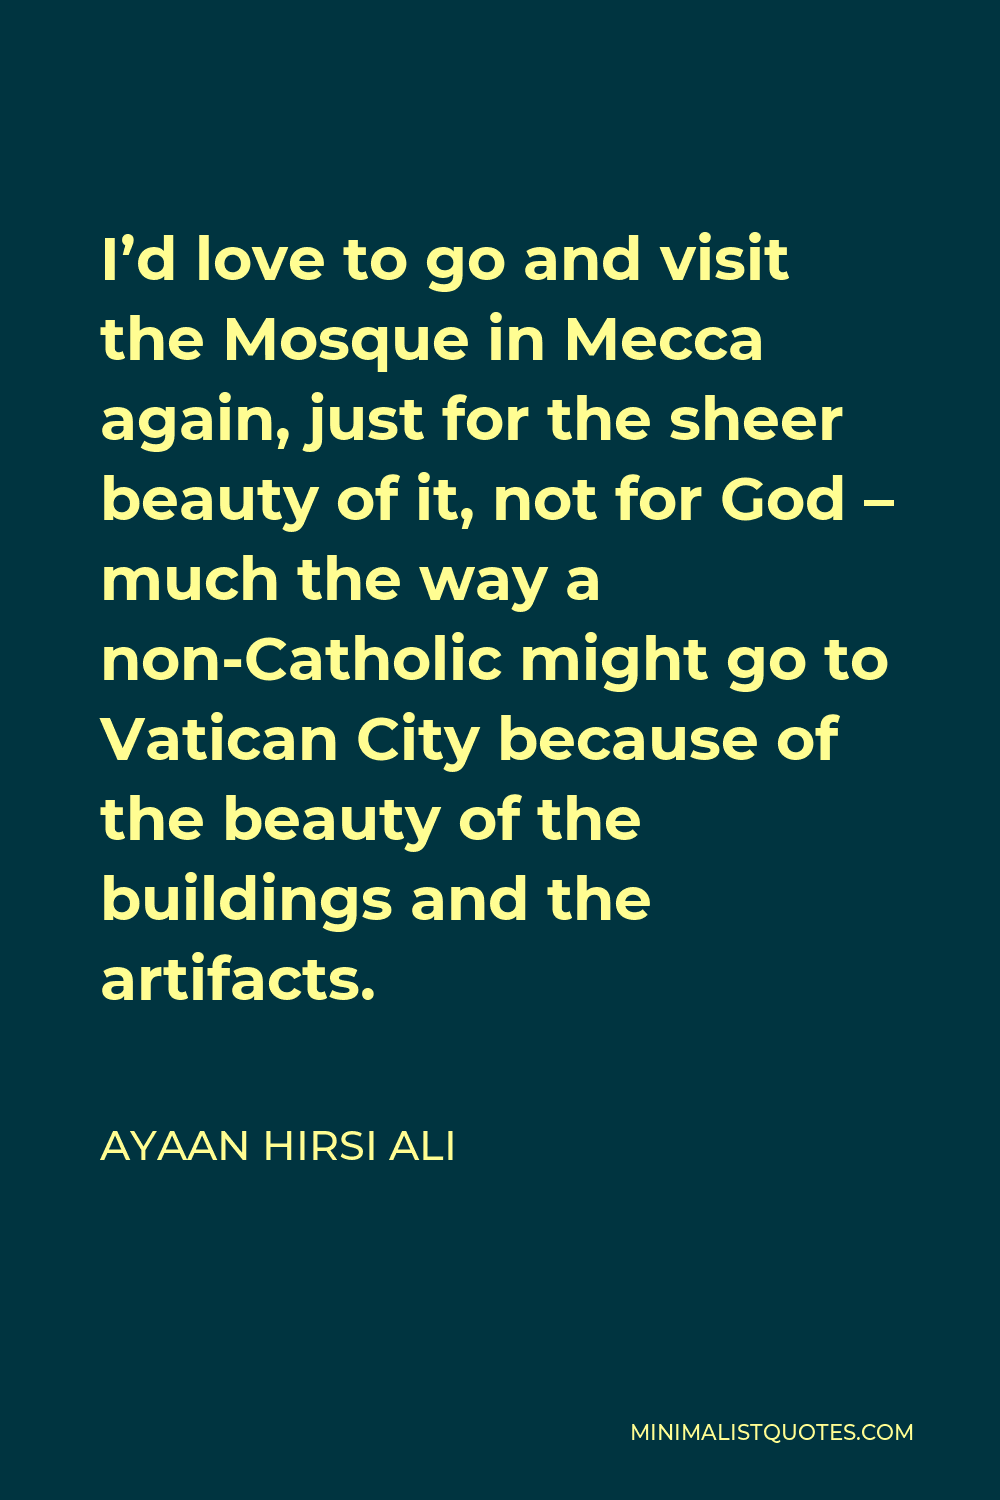 Ayaan Hirsi Ali Quote - I’d love to go and visit the Mosque in Mecca again, just for the sheer beauty of it, not for God – much the way a non-Catholic might go to Vatican City because of the beauty of the buildings and the artifacts.